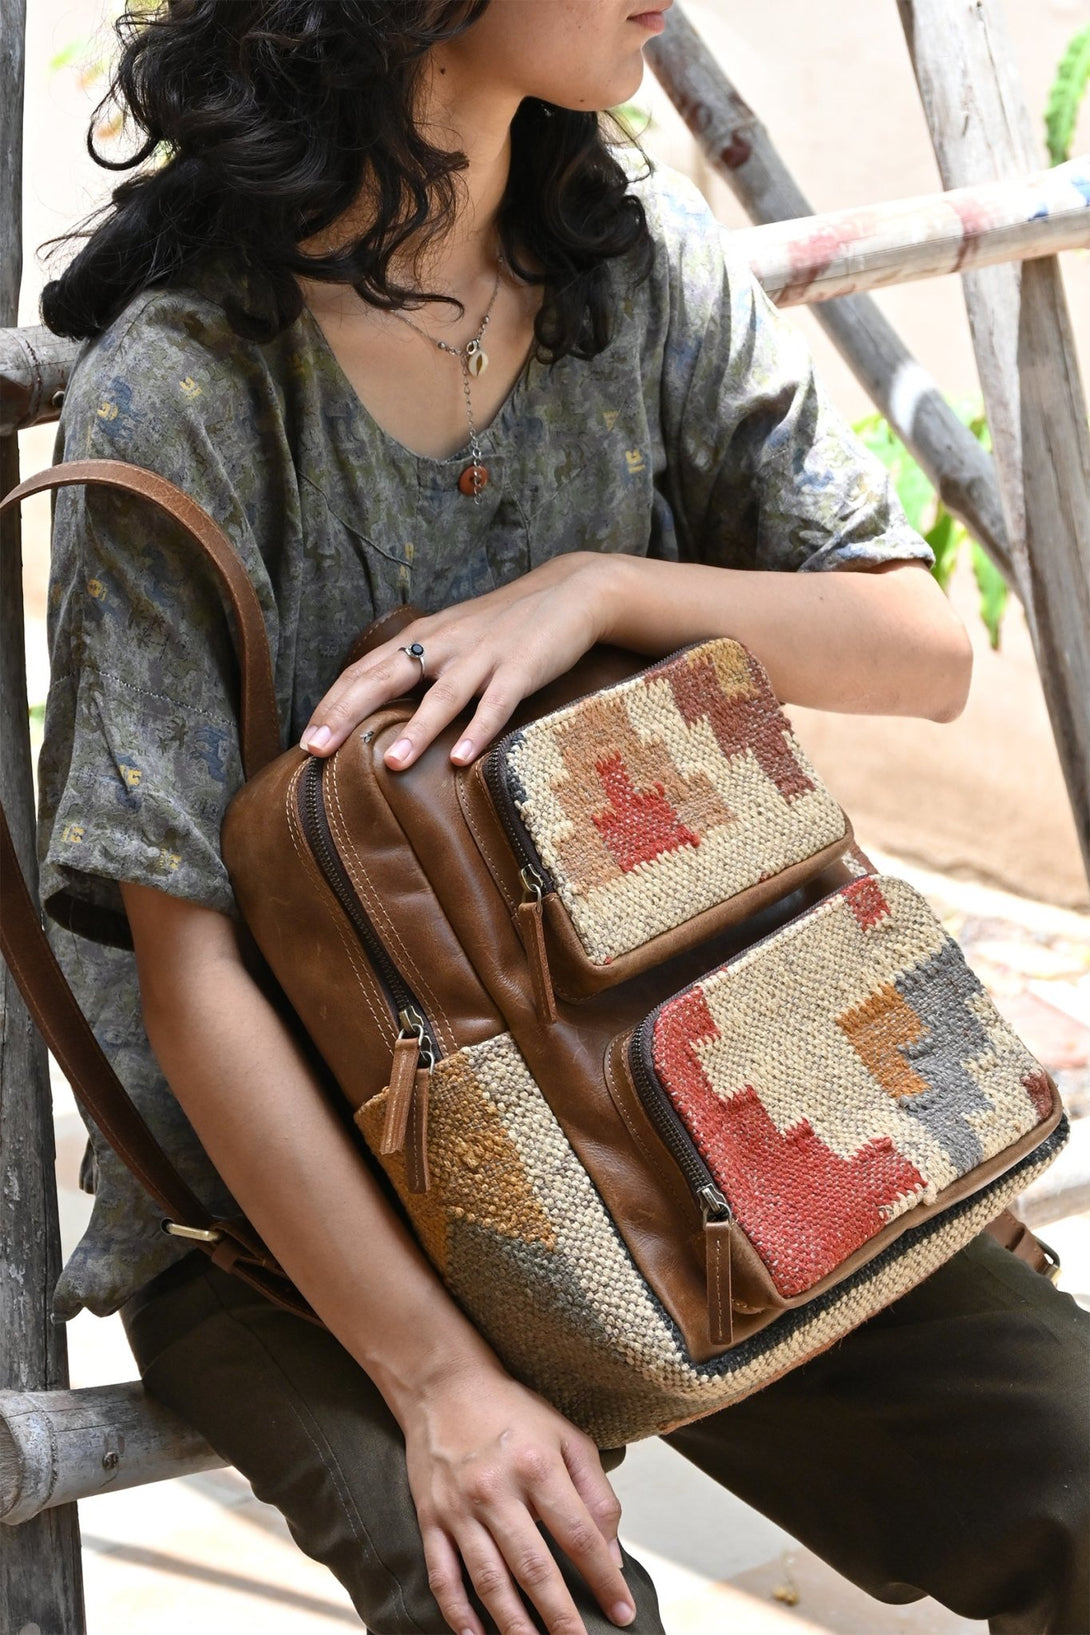 SABRE - LEATHER AND KILIM BACKPACK - ART AVENUE